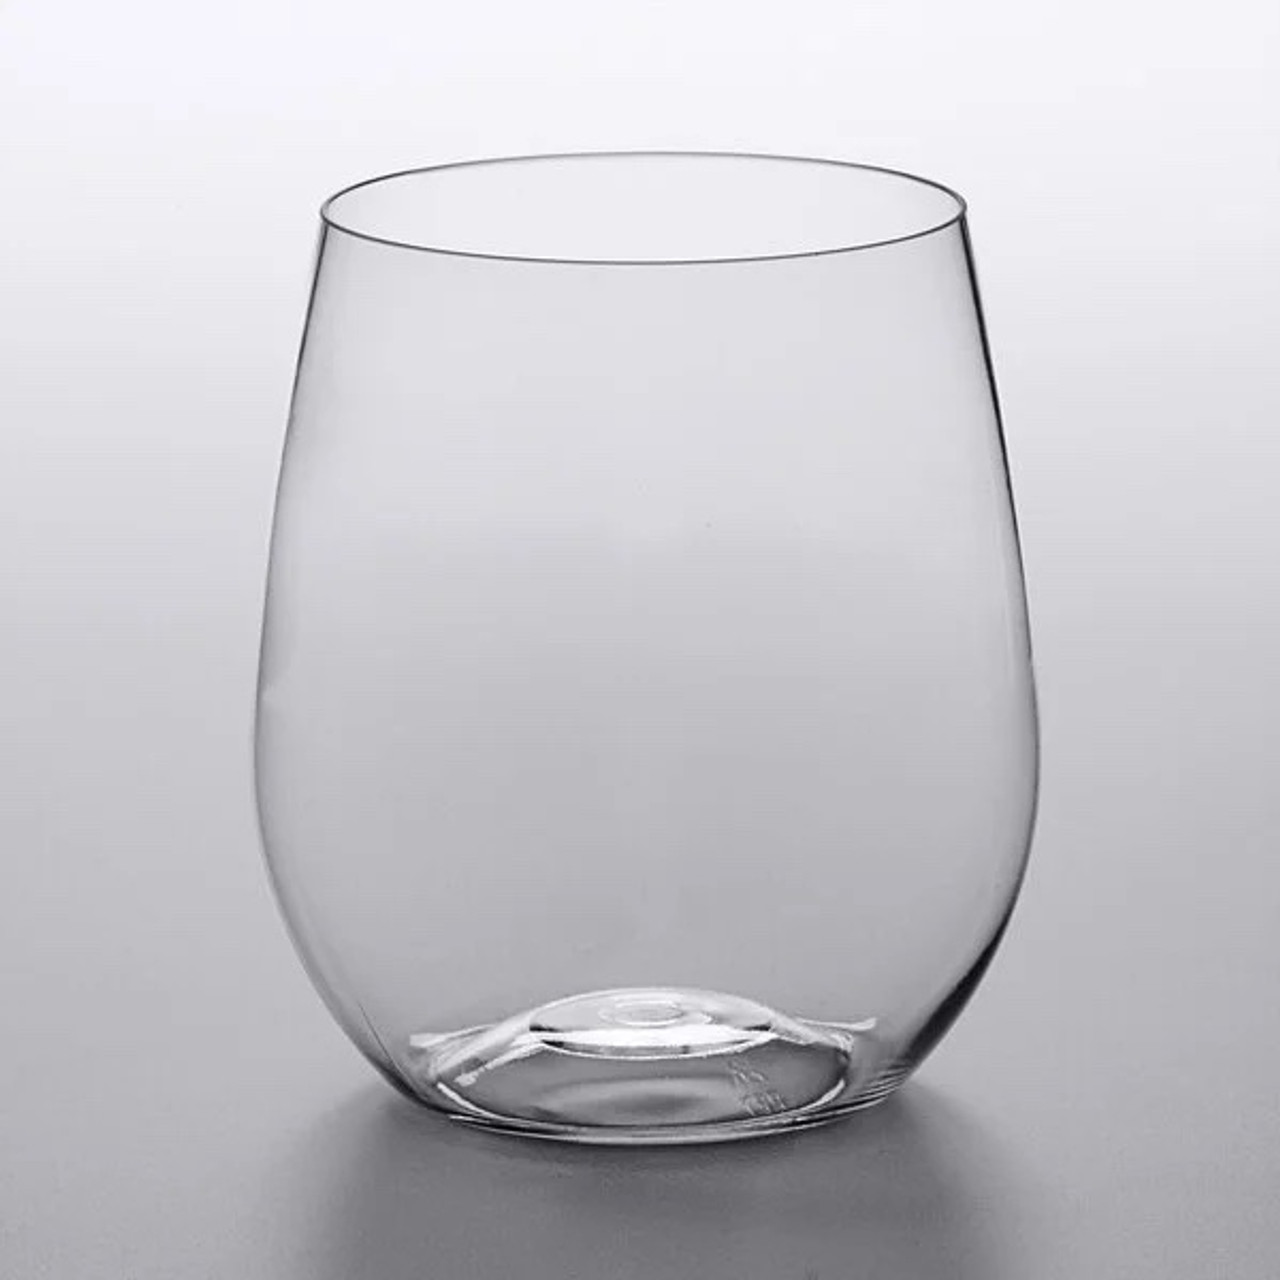 Tebery 12 Pack Unbreakable Plastic Wine Glasses Stemless, 20 Oz Heavy Duty  Clear Drinking Glasses Wi…See more Tebery 12 Pack Unbreakable Plastic Wine